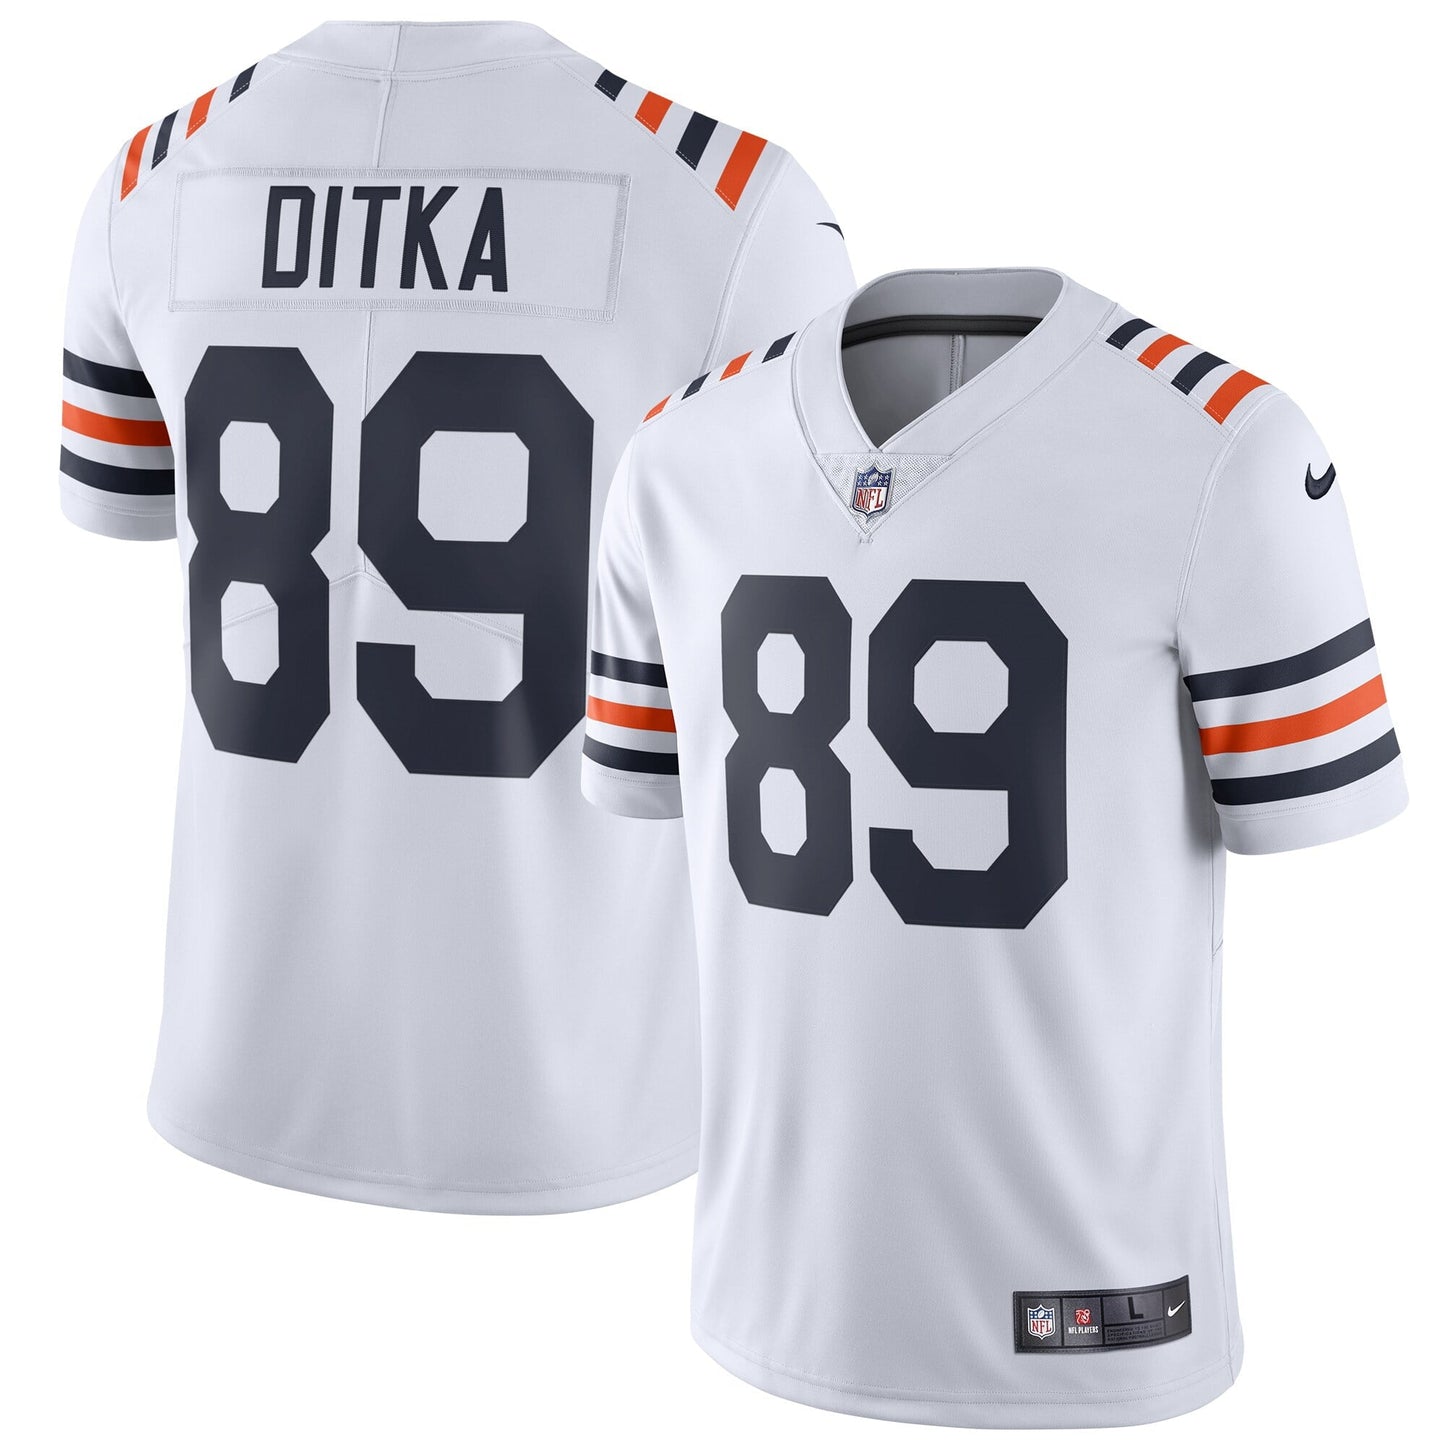 Men's Nike Mike Ditka White Chicago Bears 2019 Alternate Classic Retired Player Limited Jersey